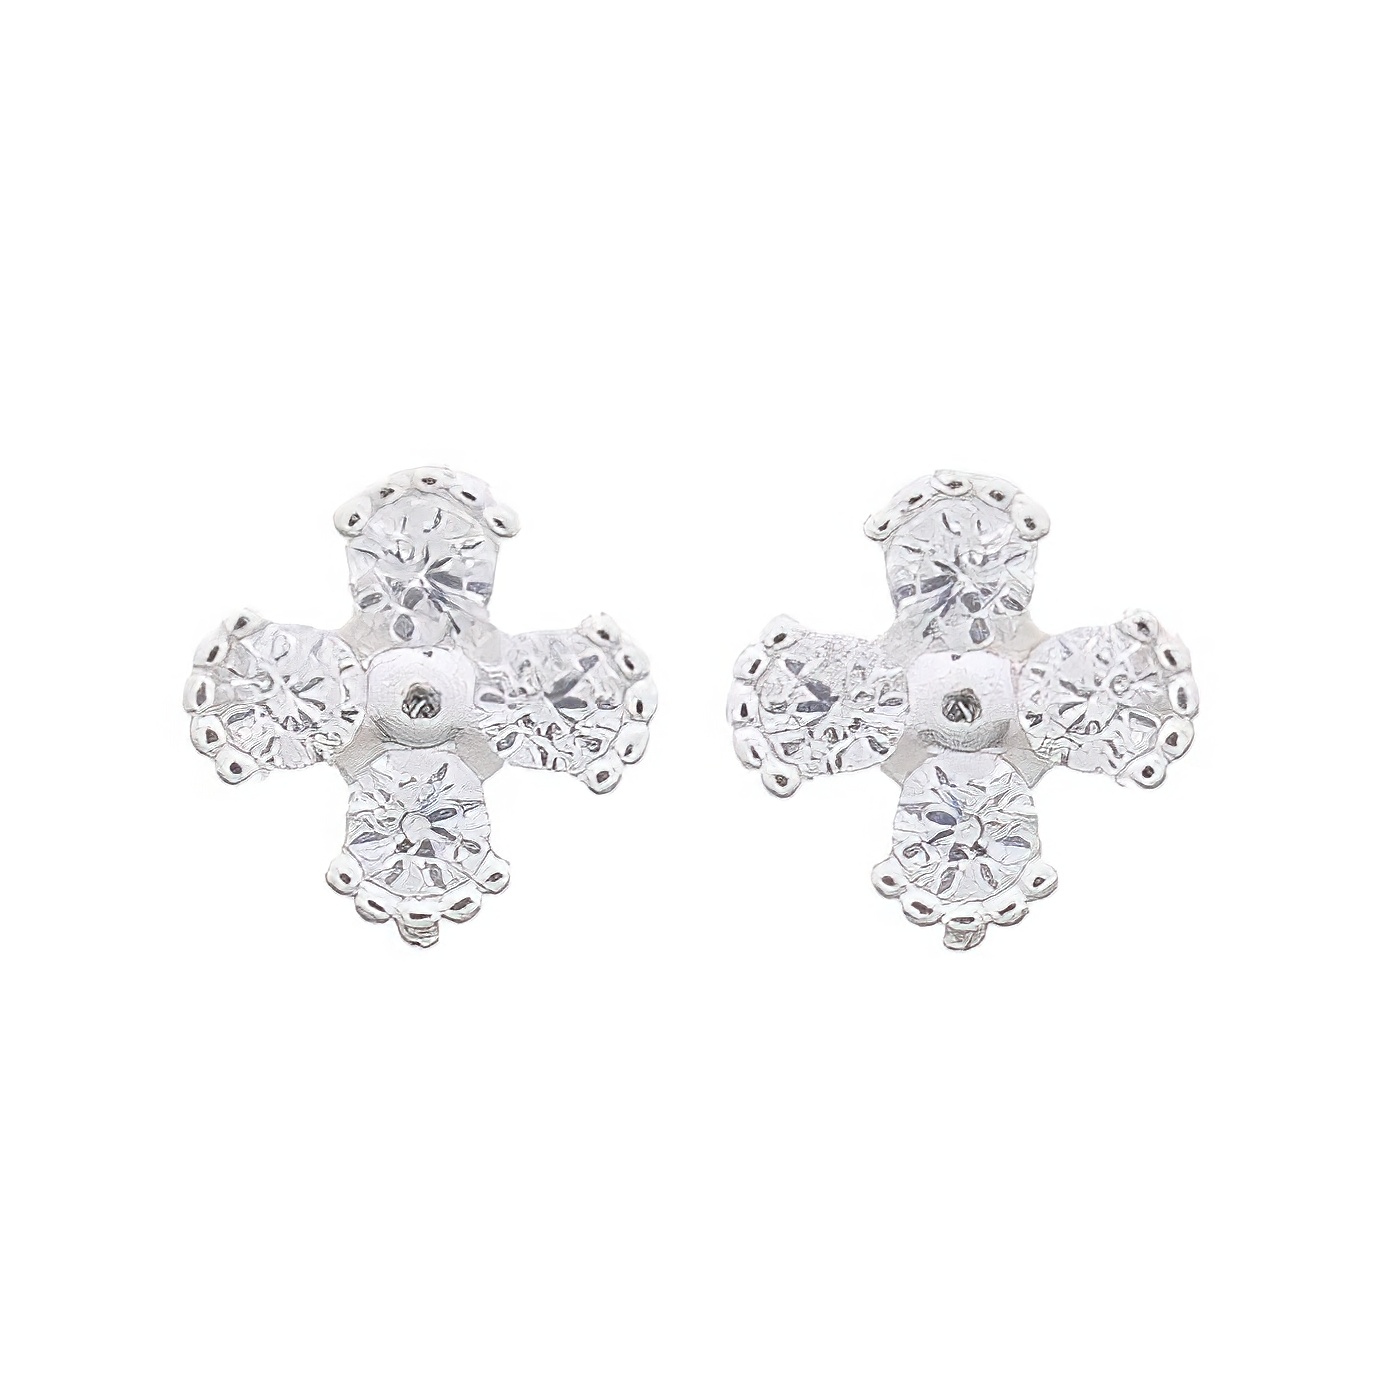 Adorable Four-Petals Beaded 925 Stud Earrings With CZ White by BeYindi 